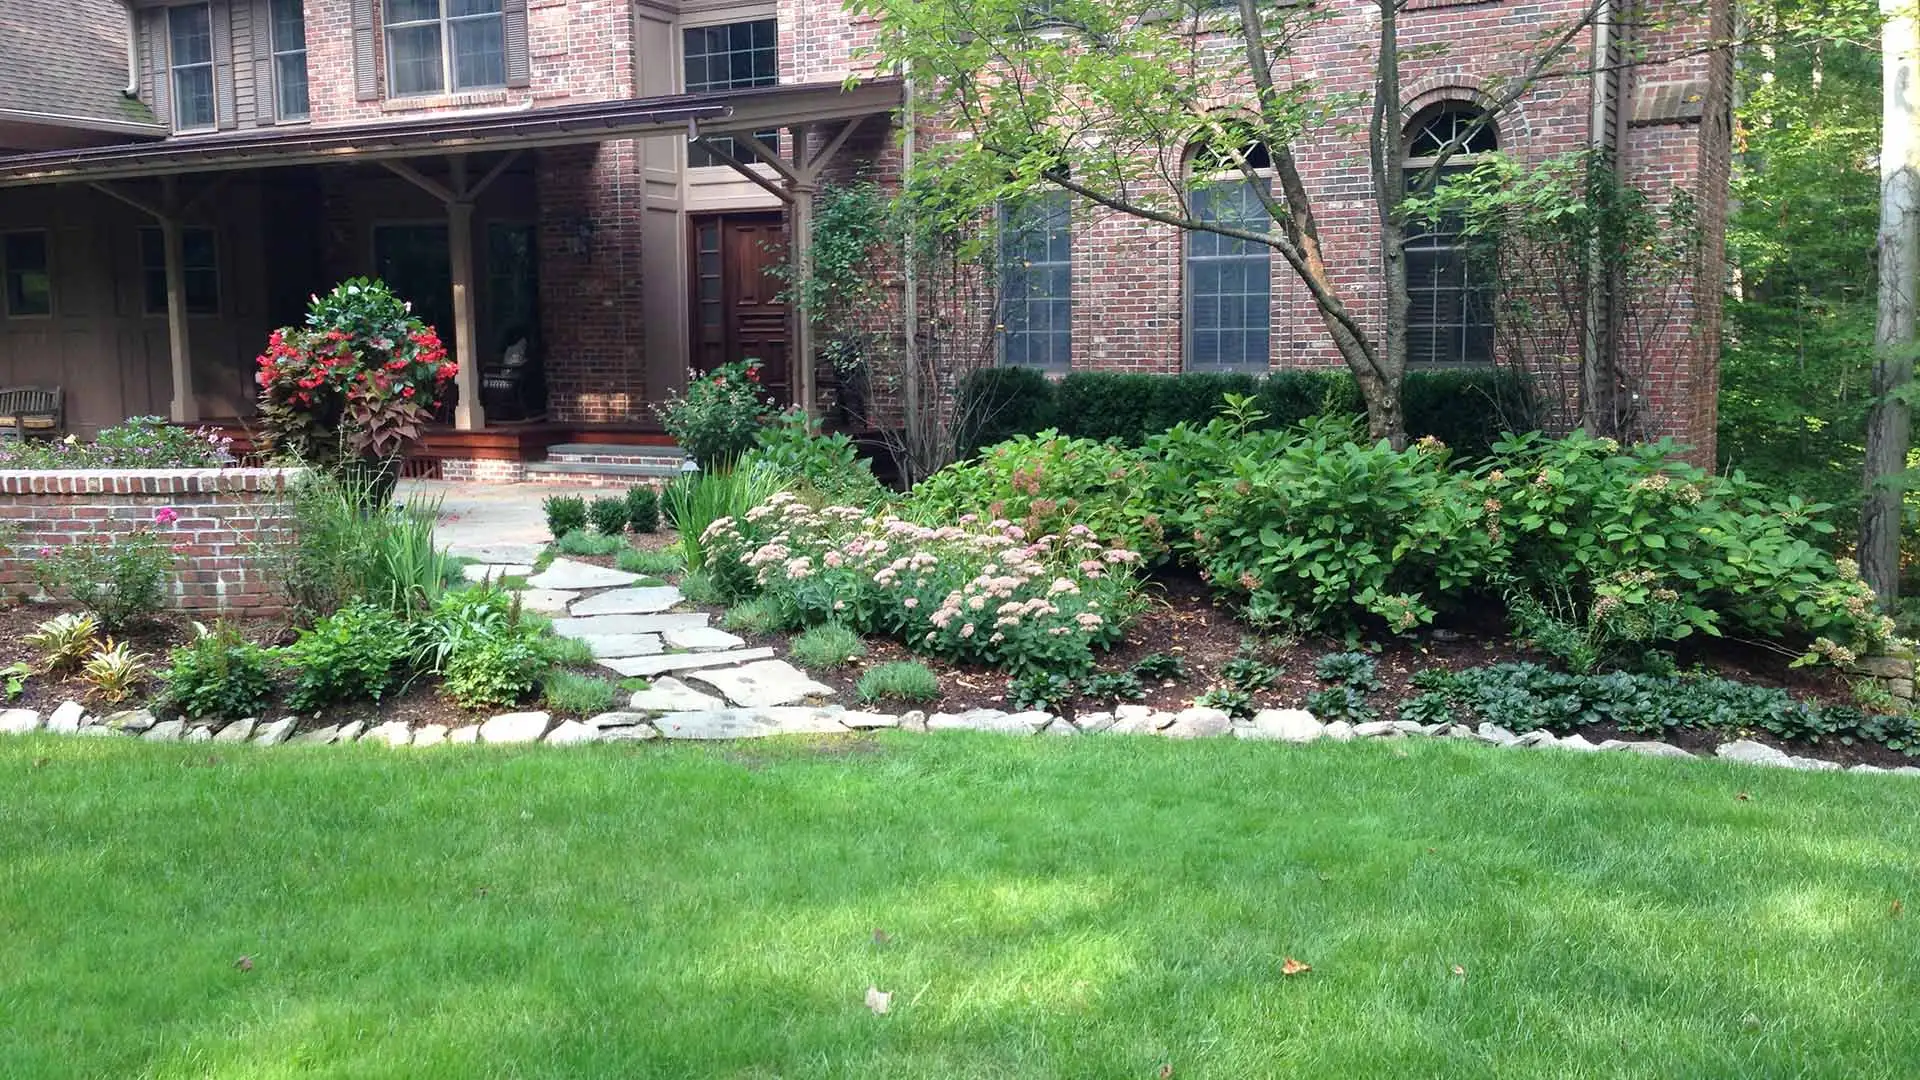 Healthy home lawn and maintained landscaping in Berkeley Heights, NJ.